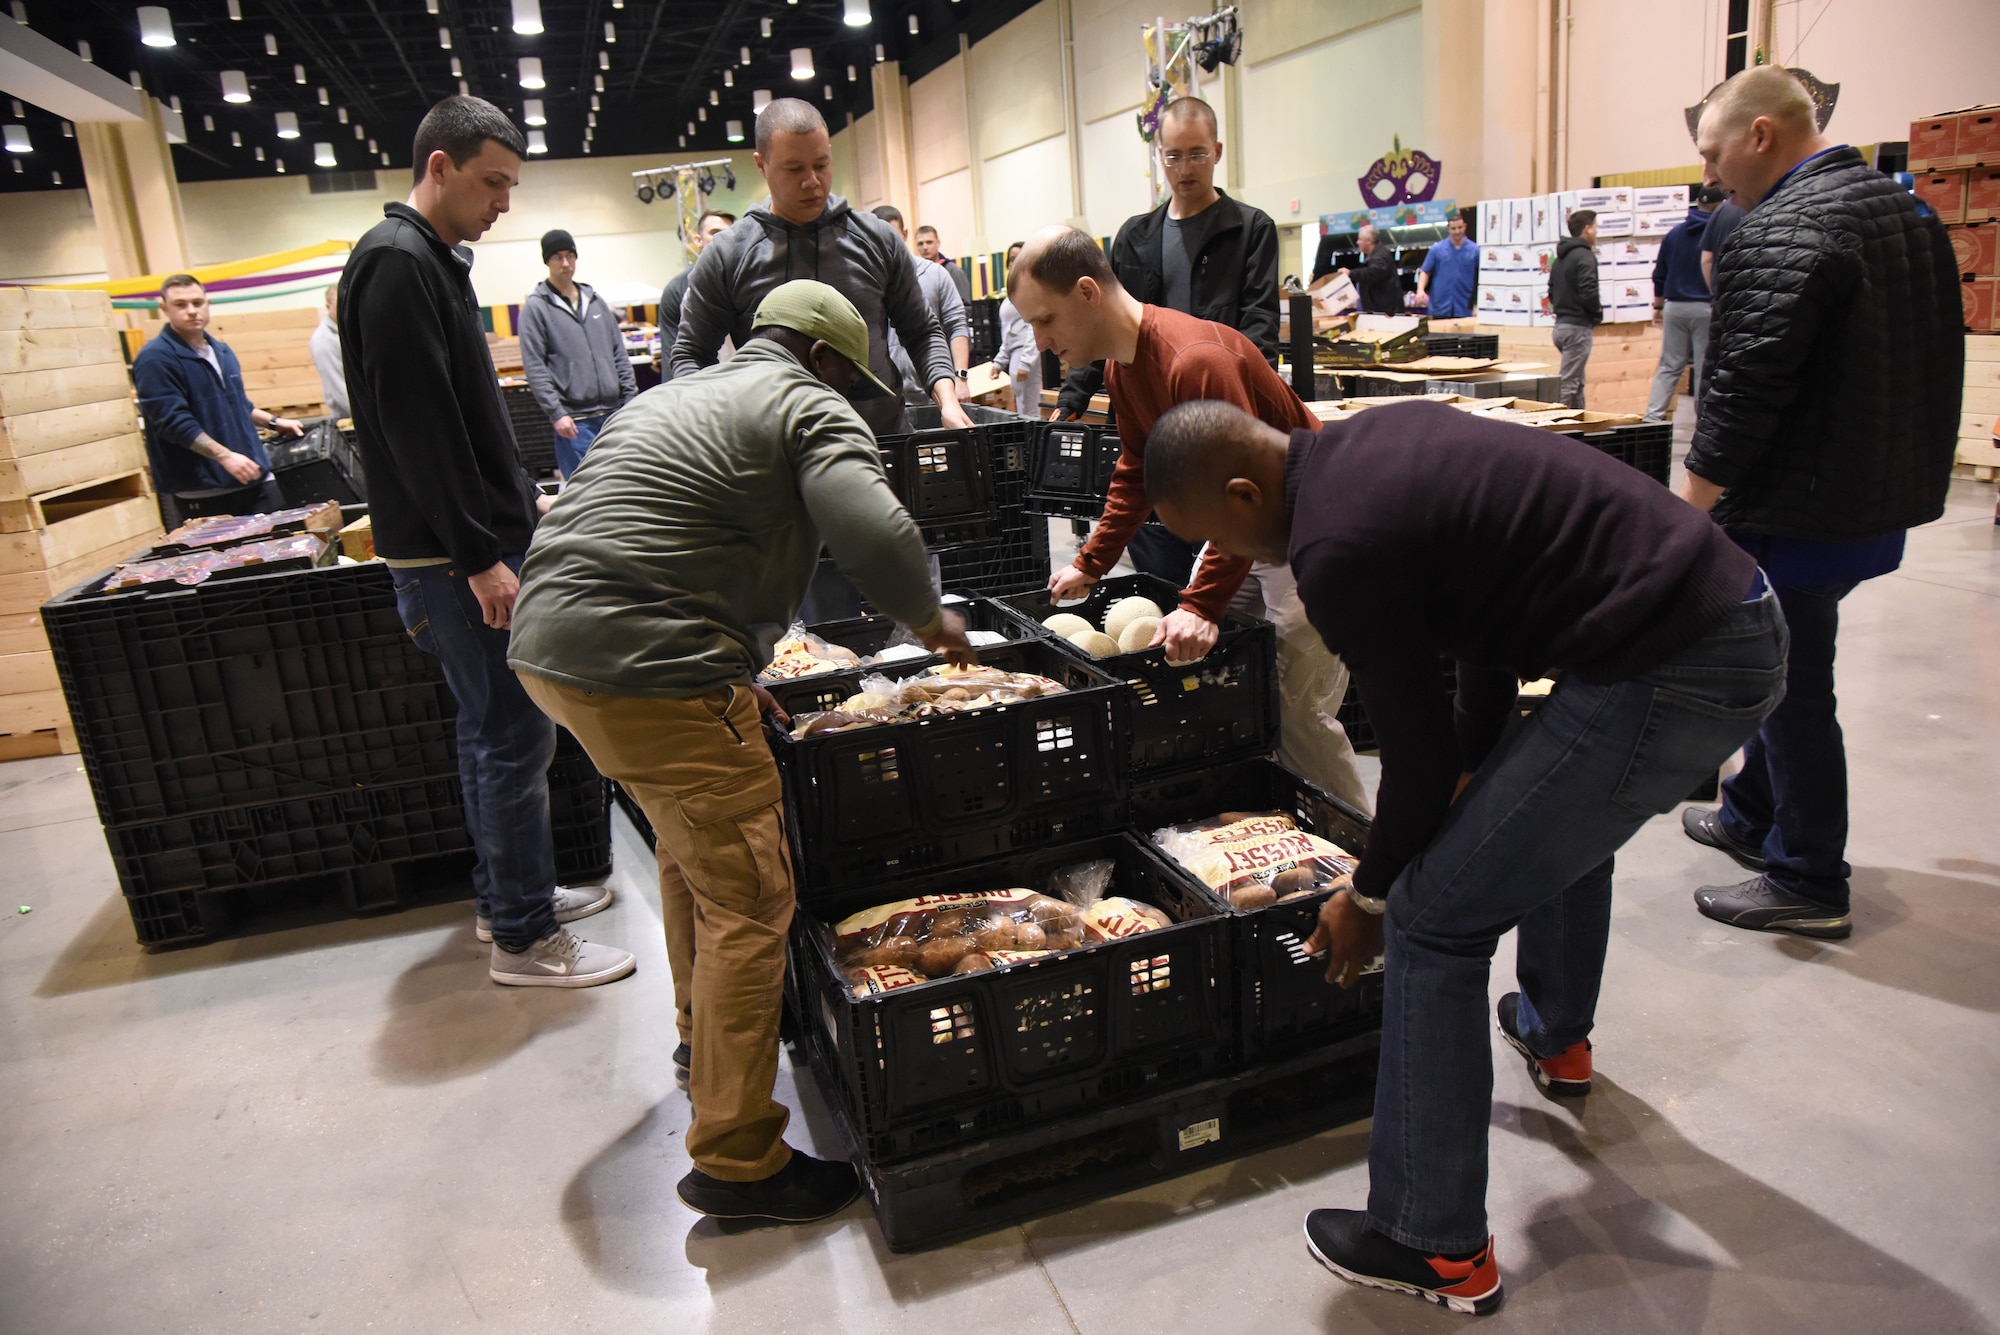 Keesler personnel package food items into crates during a food drive at the Mississippi Coast Coliseum and Convention Center Jan. 16, 2018, Biloxi, Mississippi. More than 80 Airmen participated in the wing-level community sponsored volunteer event packaging over 21,000 pounds of food, equating to approximately 17,500 meals that will be provided to hunger relief. (U.S. Air Force photo by Kemberly Groue)